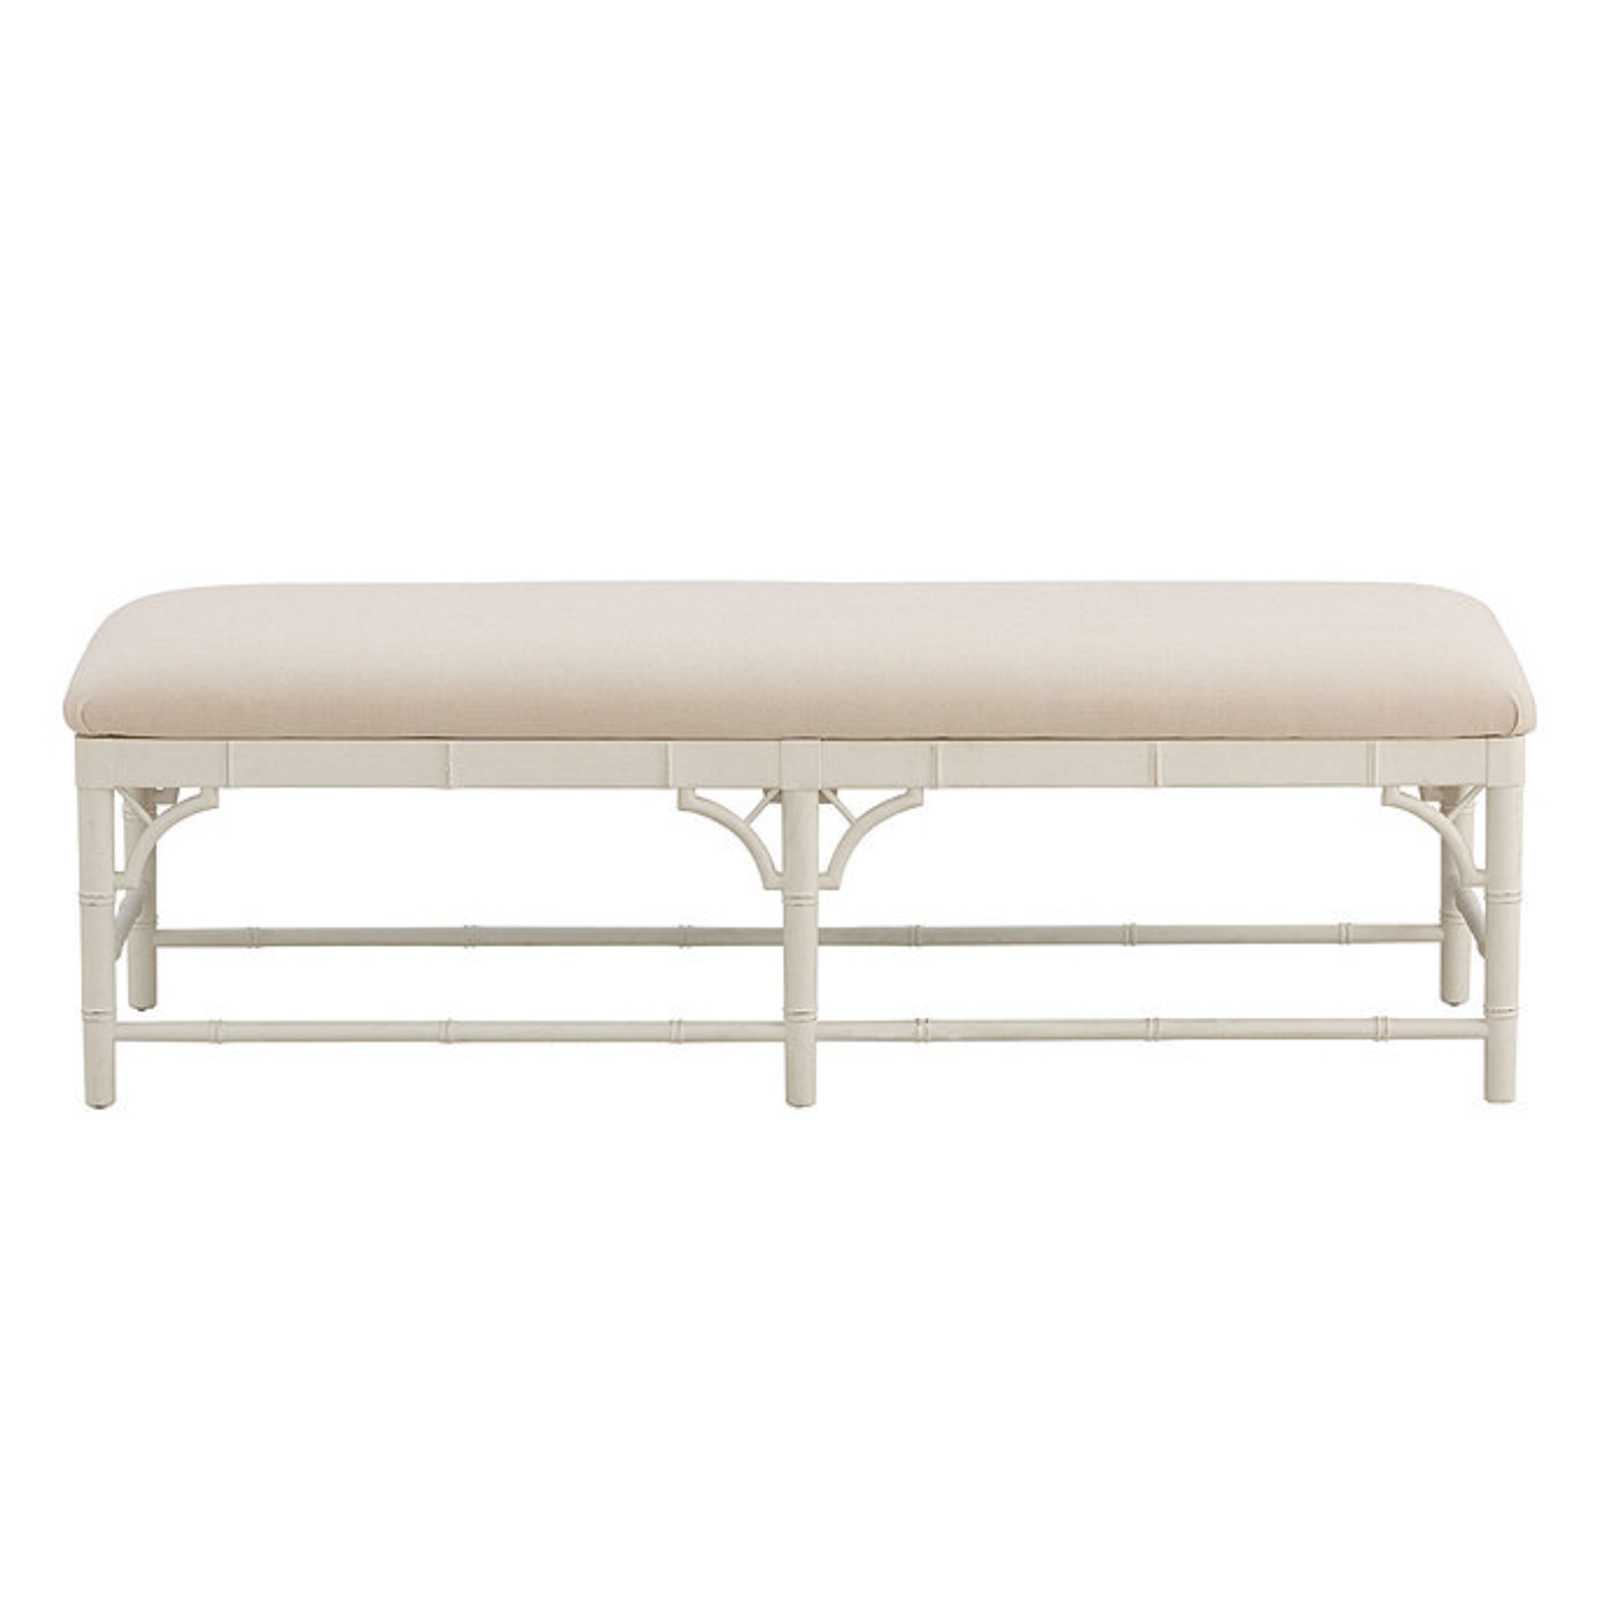 Dayna Bench with Sandberg Parchment Seat